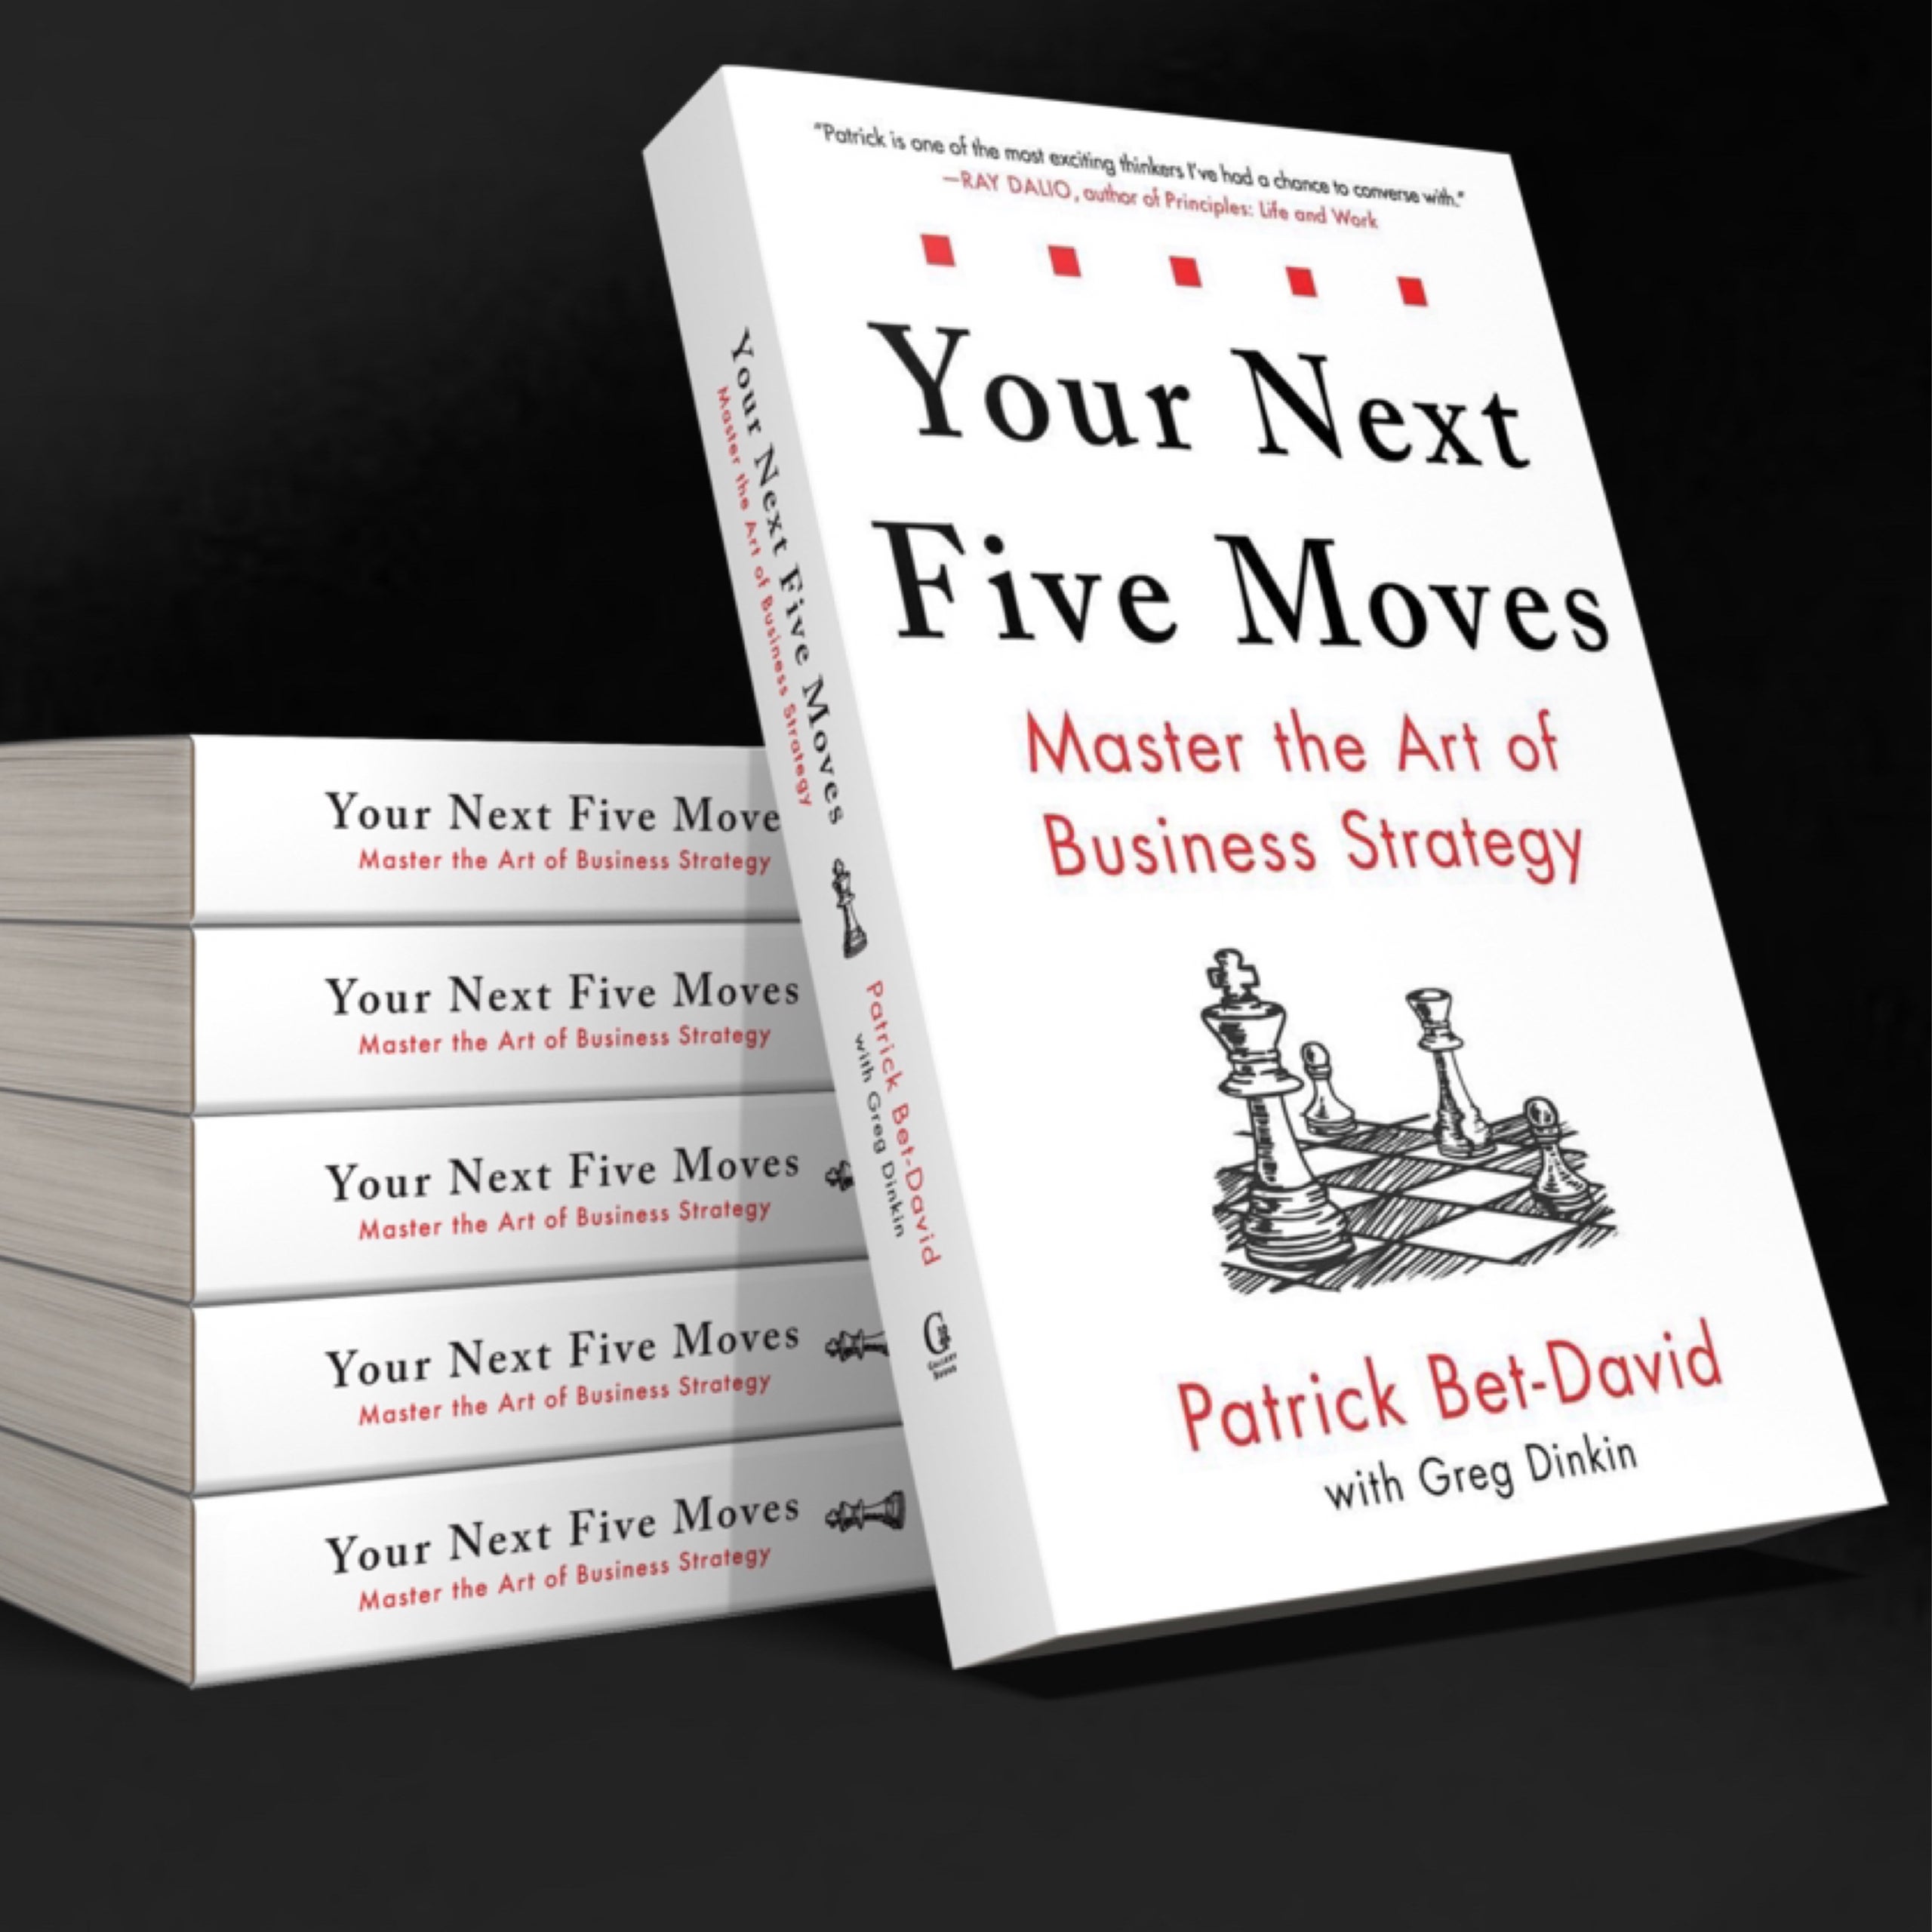 Your Next Five Moves: Master the Art of Business Strategy by